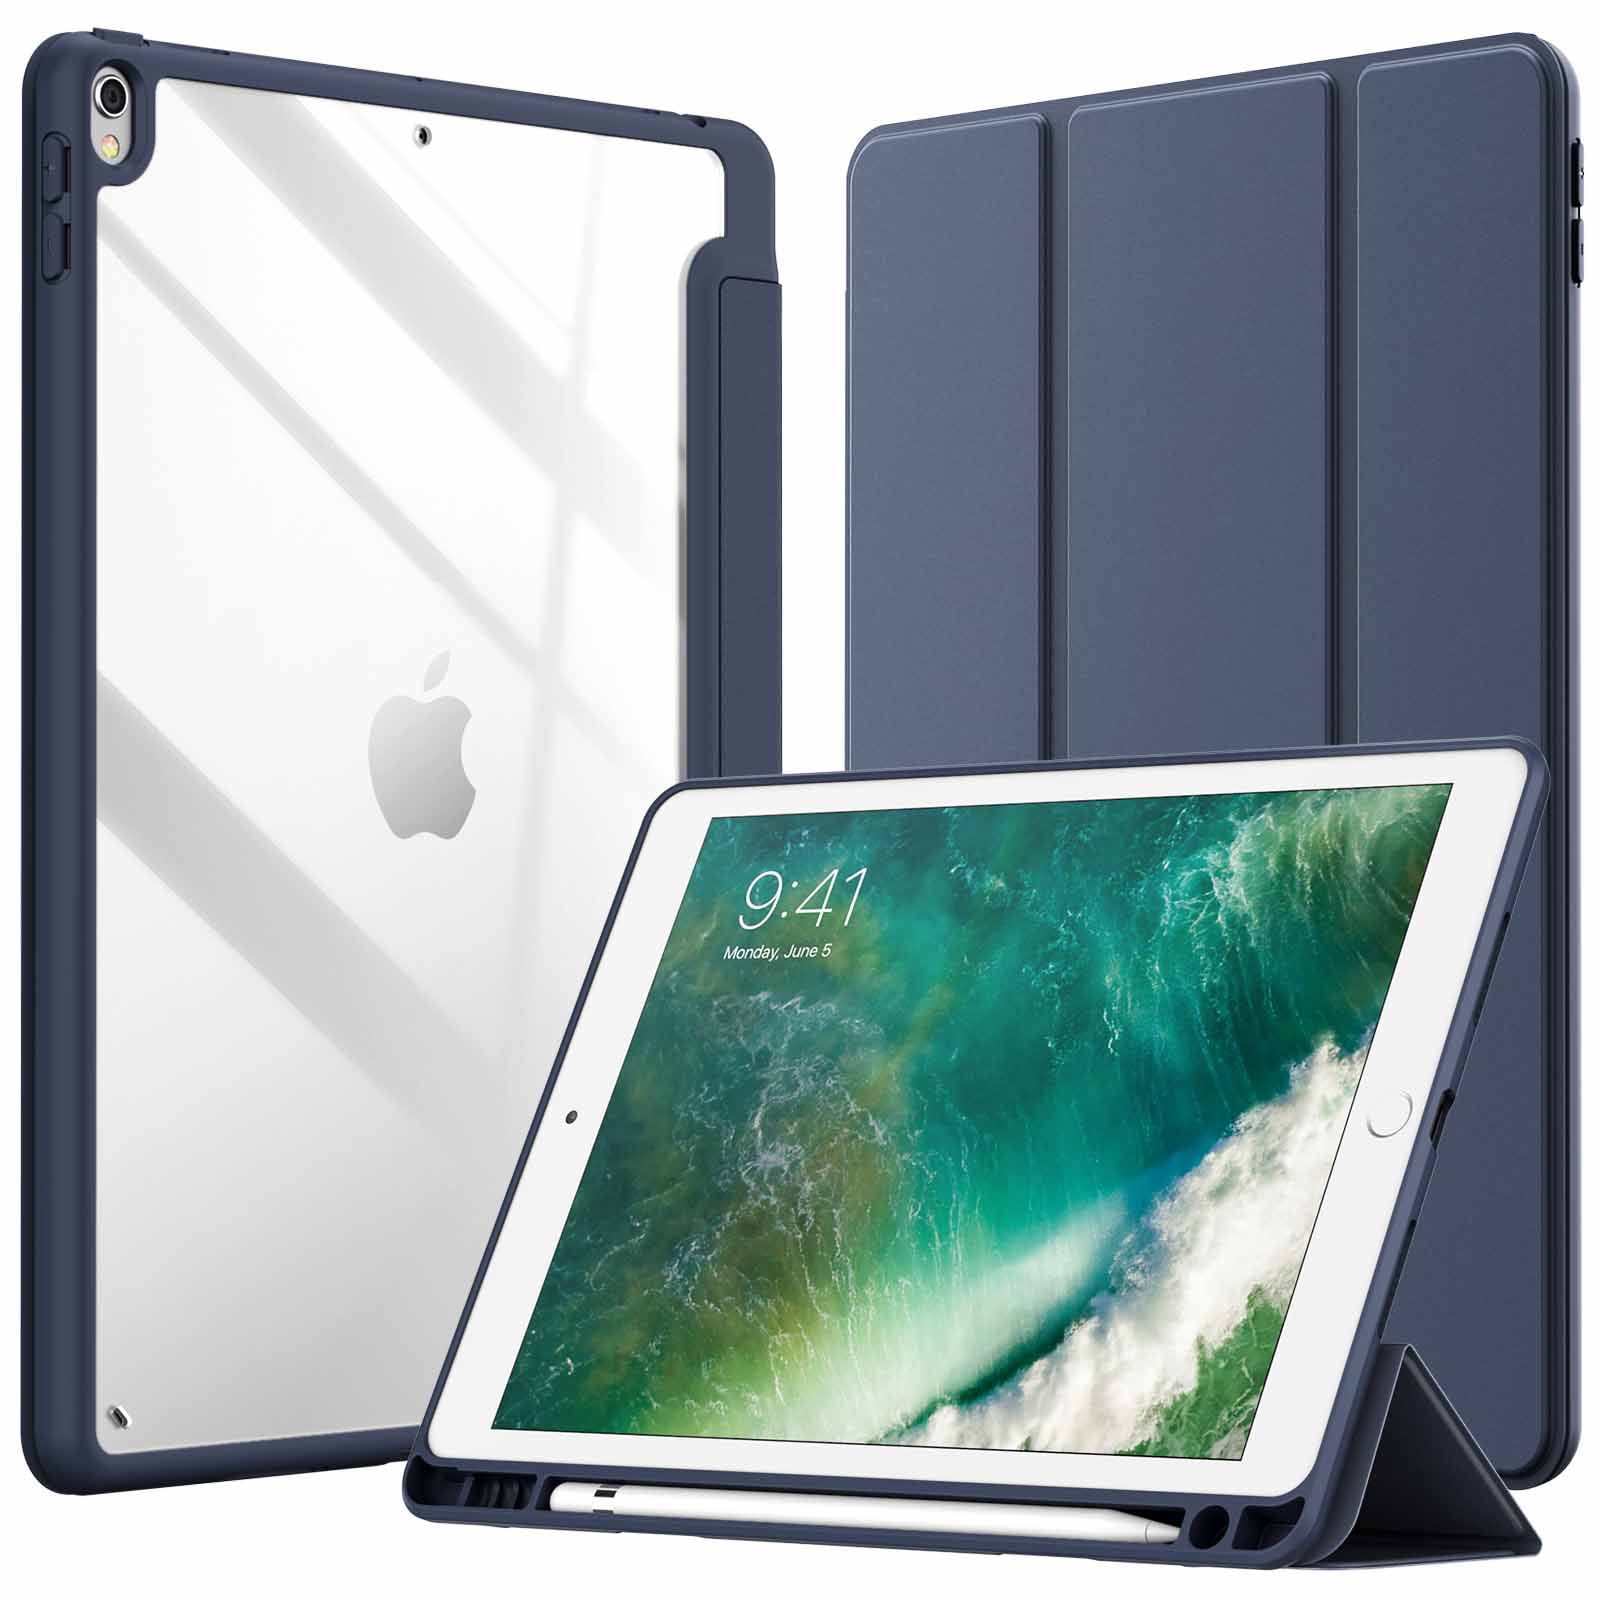 IPad Case Cover Casing IPad 102 7th Air 3 Mini 5 Pro 105 11 129 2019 97  20172018 Case Trifold Smart Case Cover With Pencil Ho3761812 From Shba,  $11.21